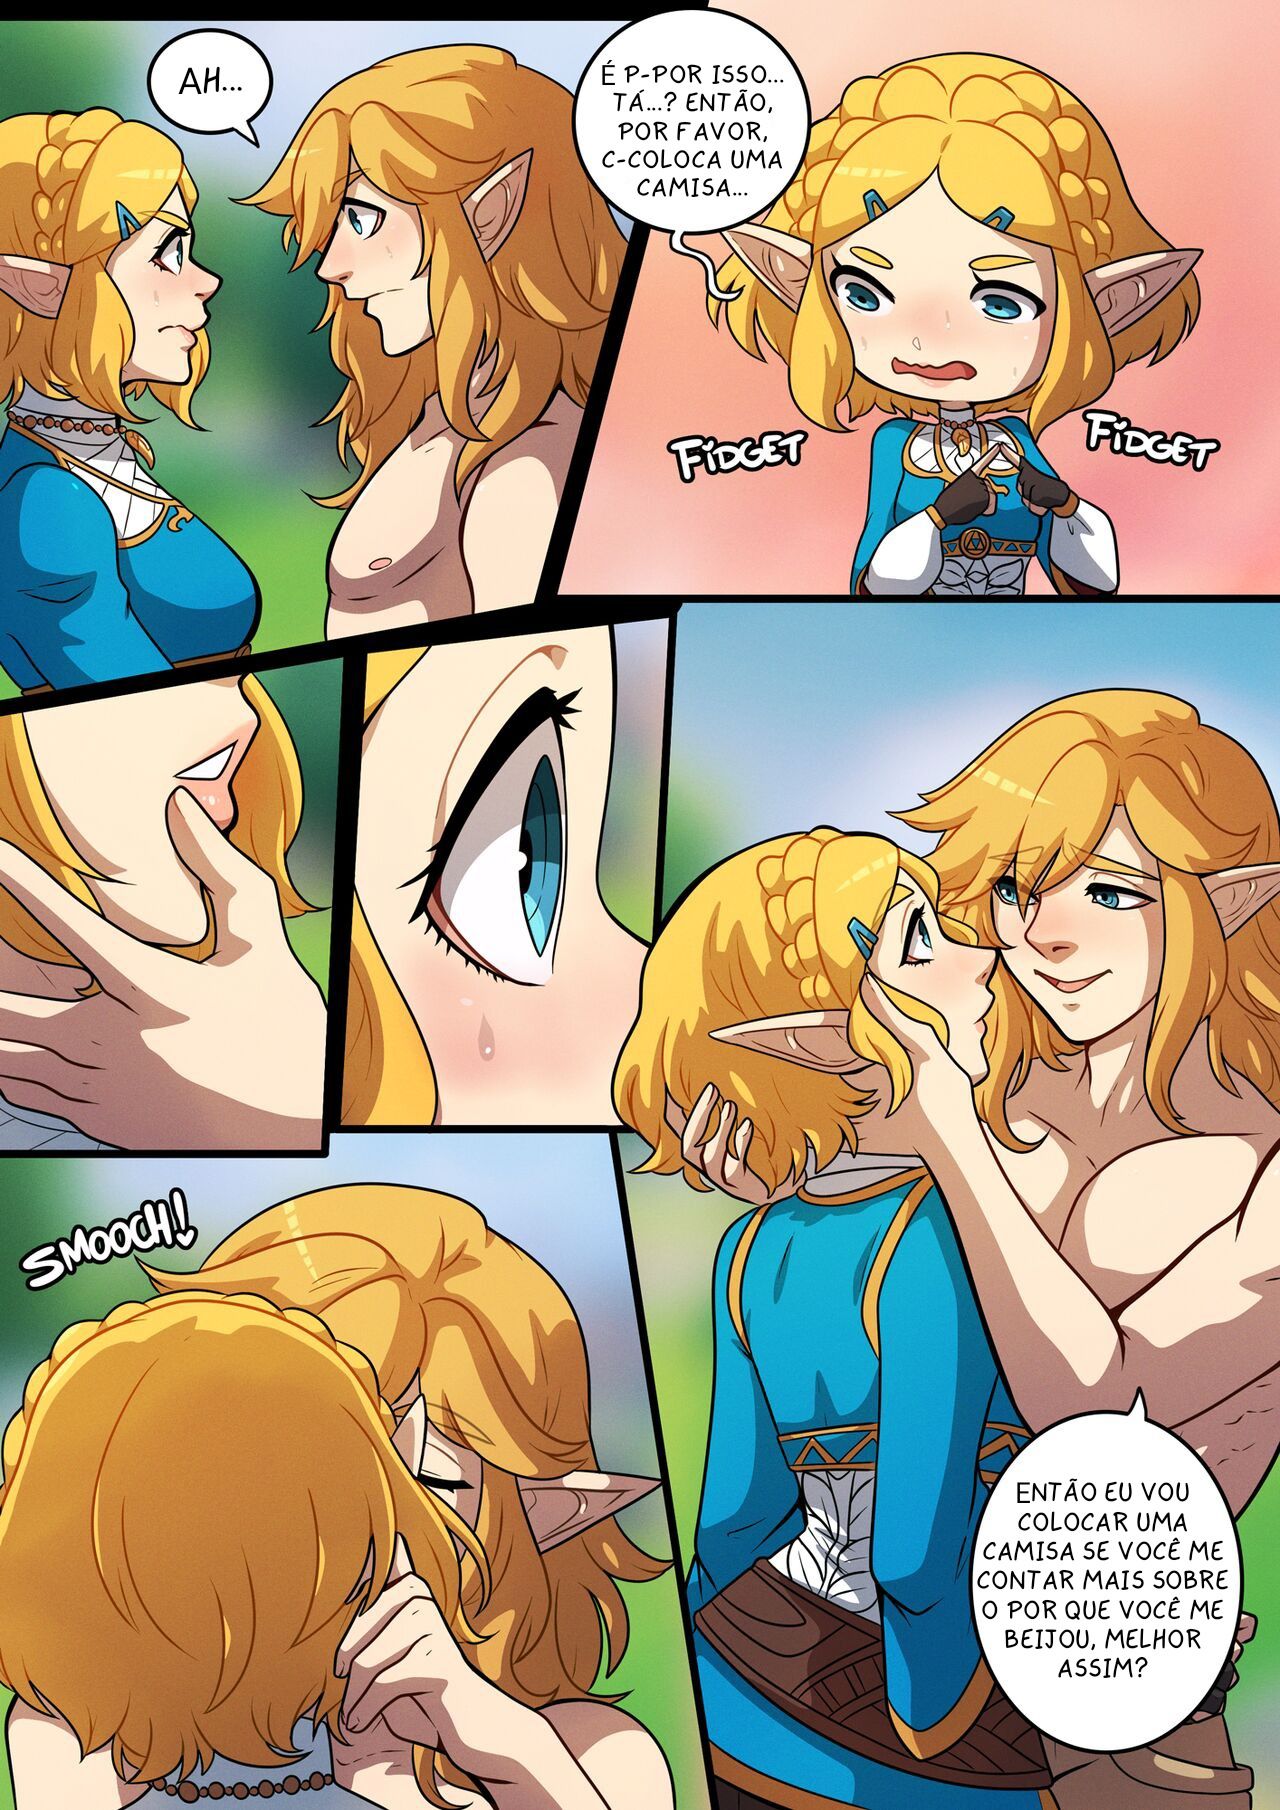 A Night with Zelda Hentai pt-br 06